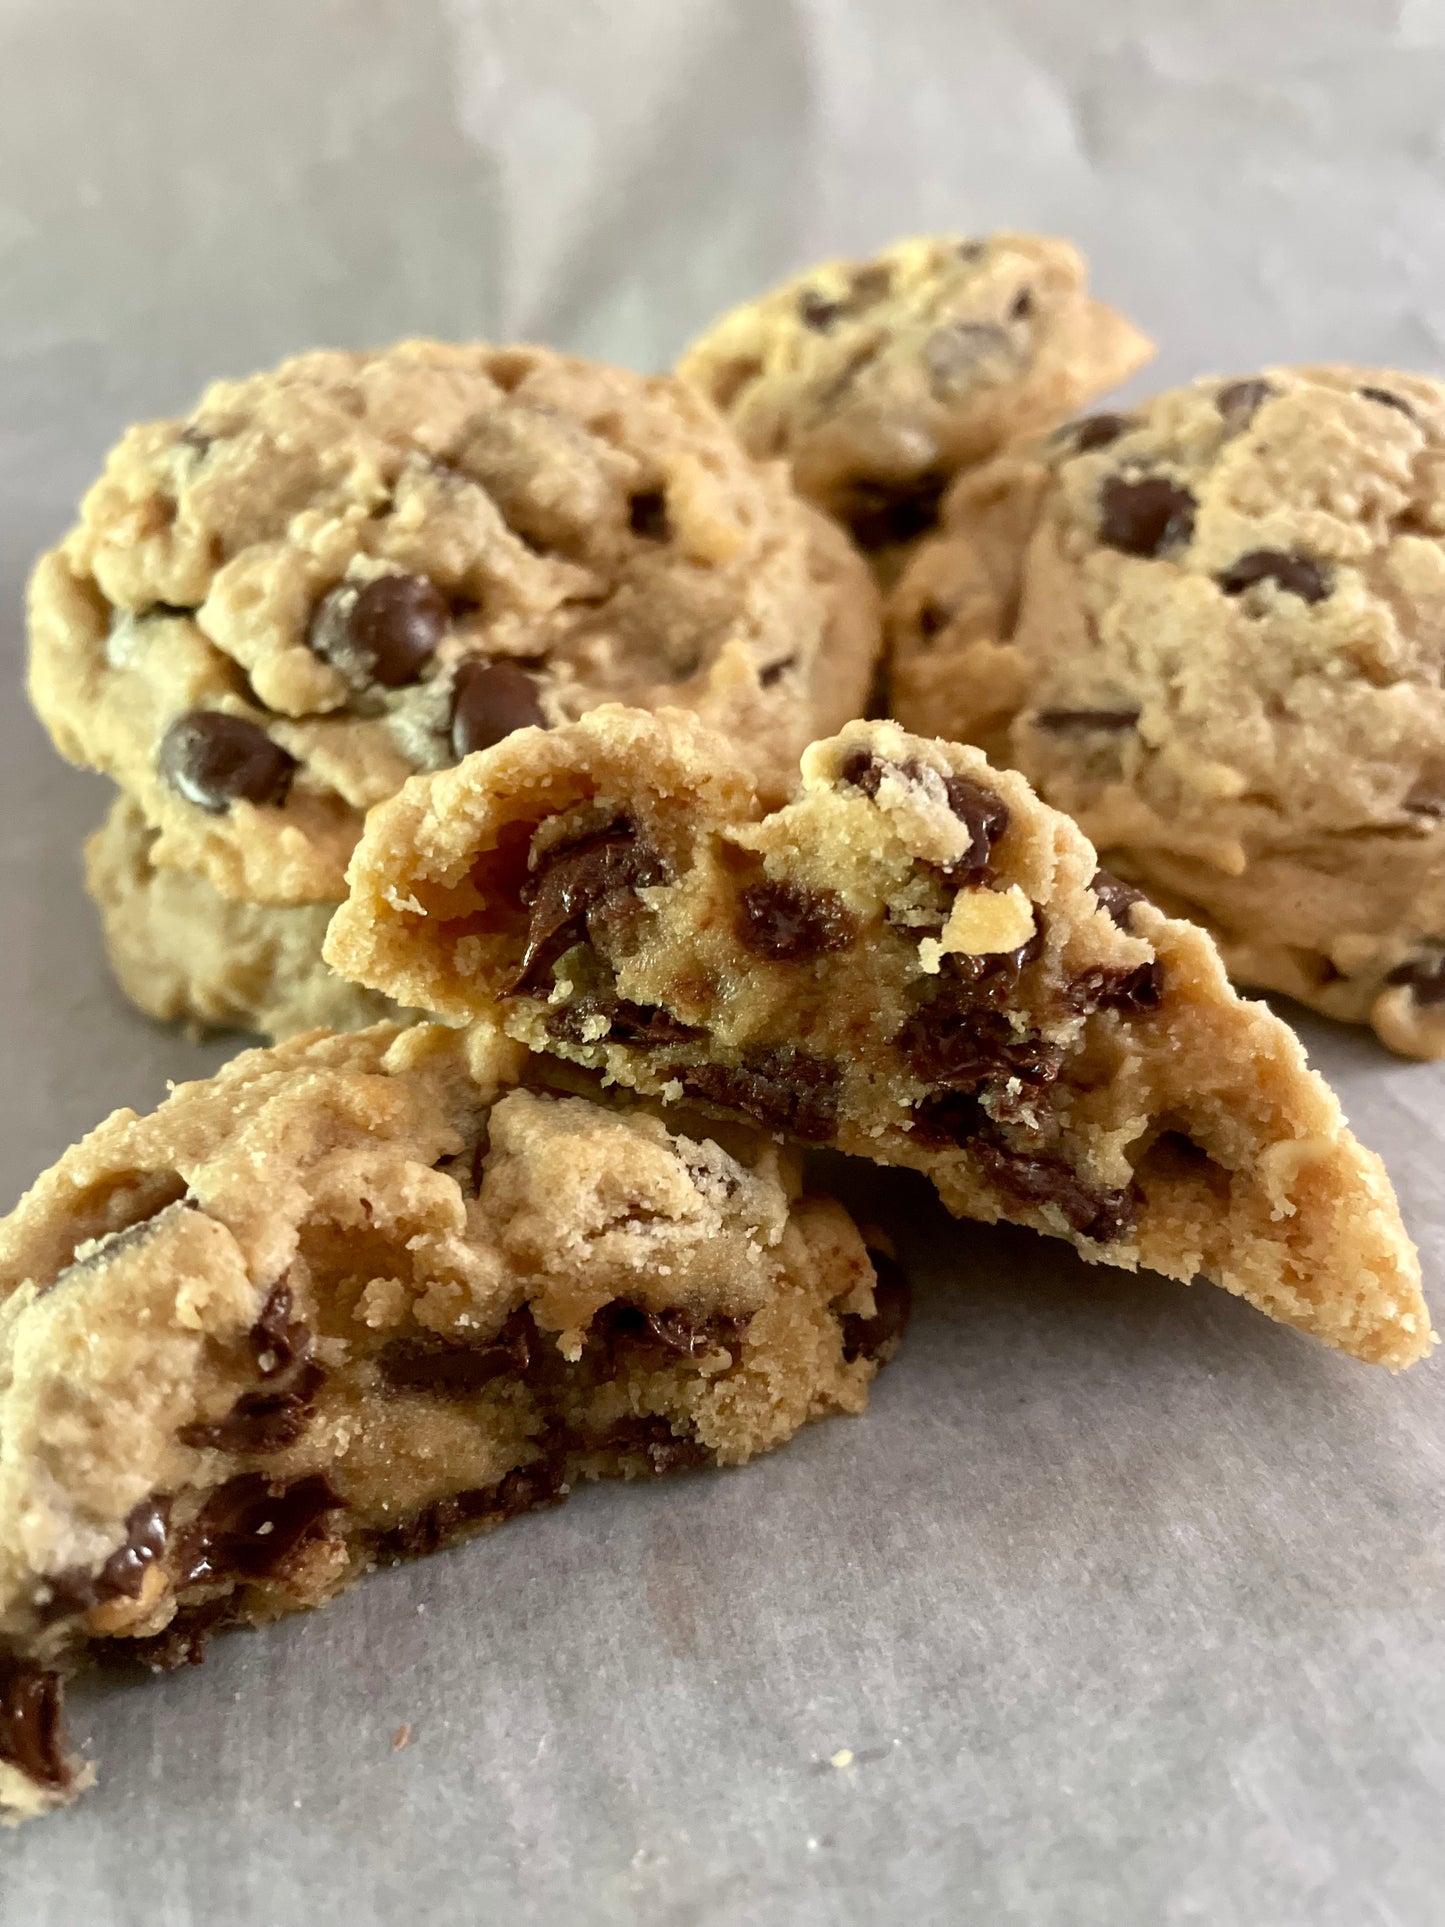 Peanut Butter - with or without Chocolate Chips